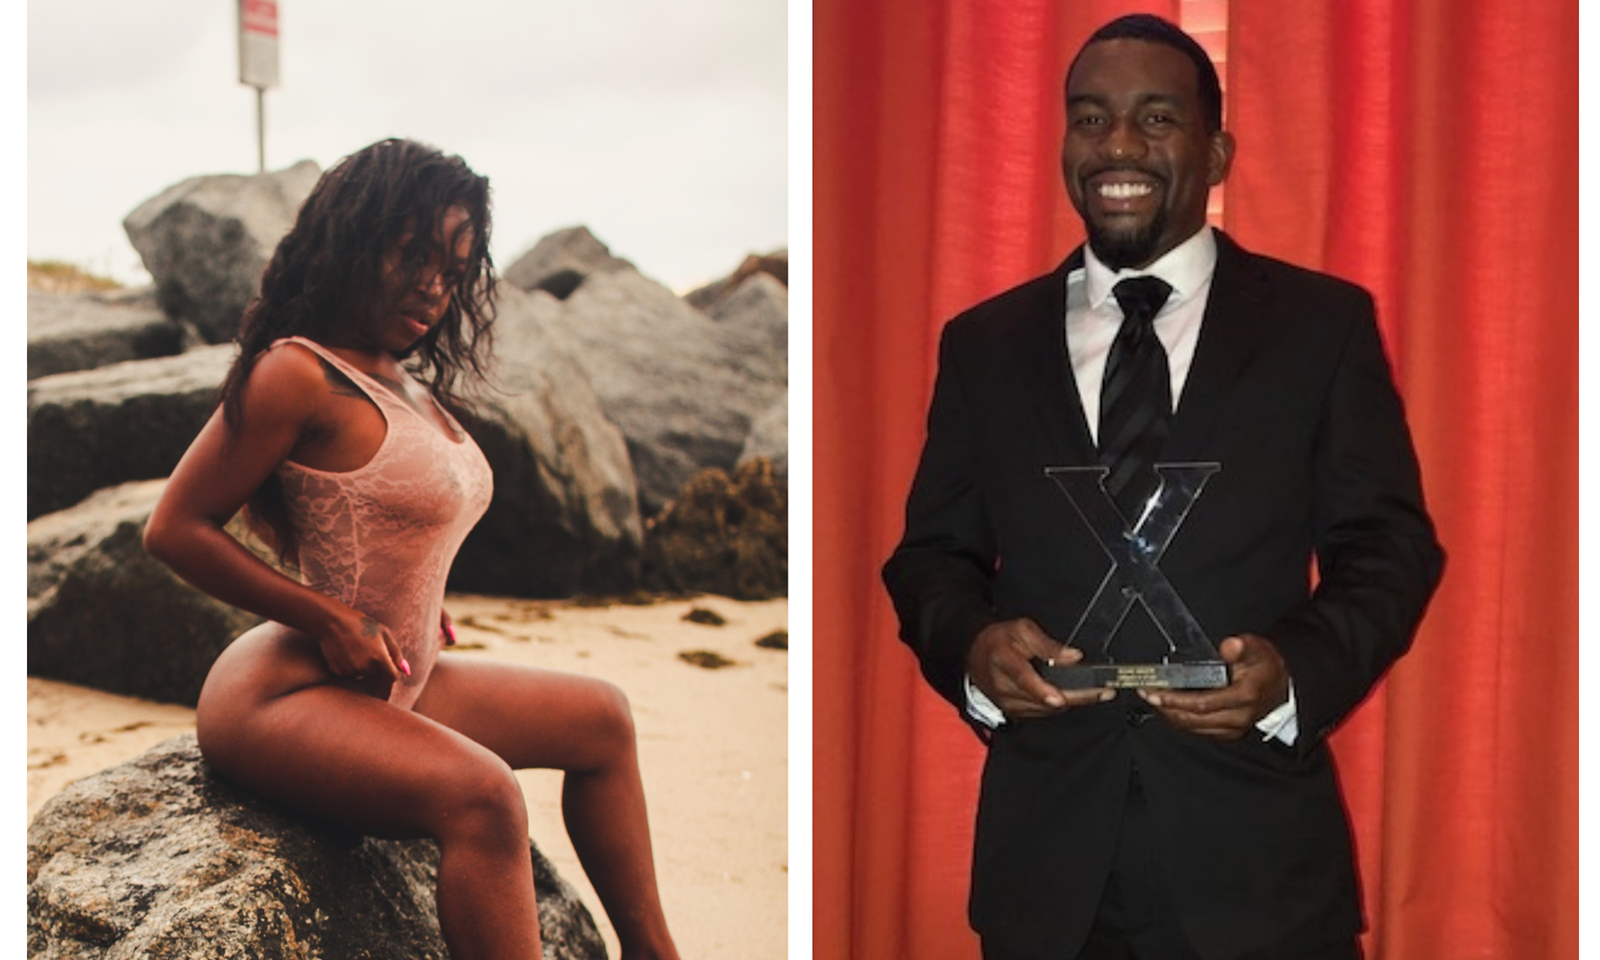 Harmonie Marquise & Rome Major Will Appear at Adultcon This Week